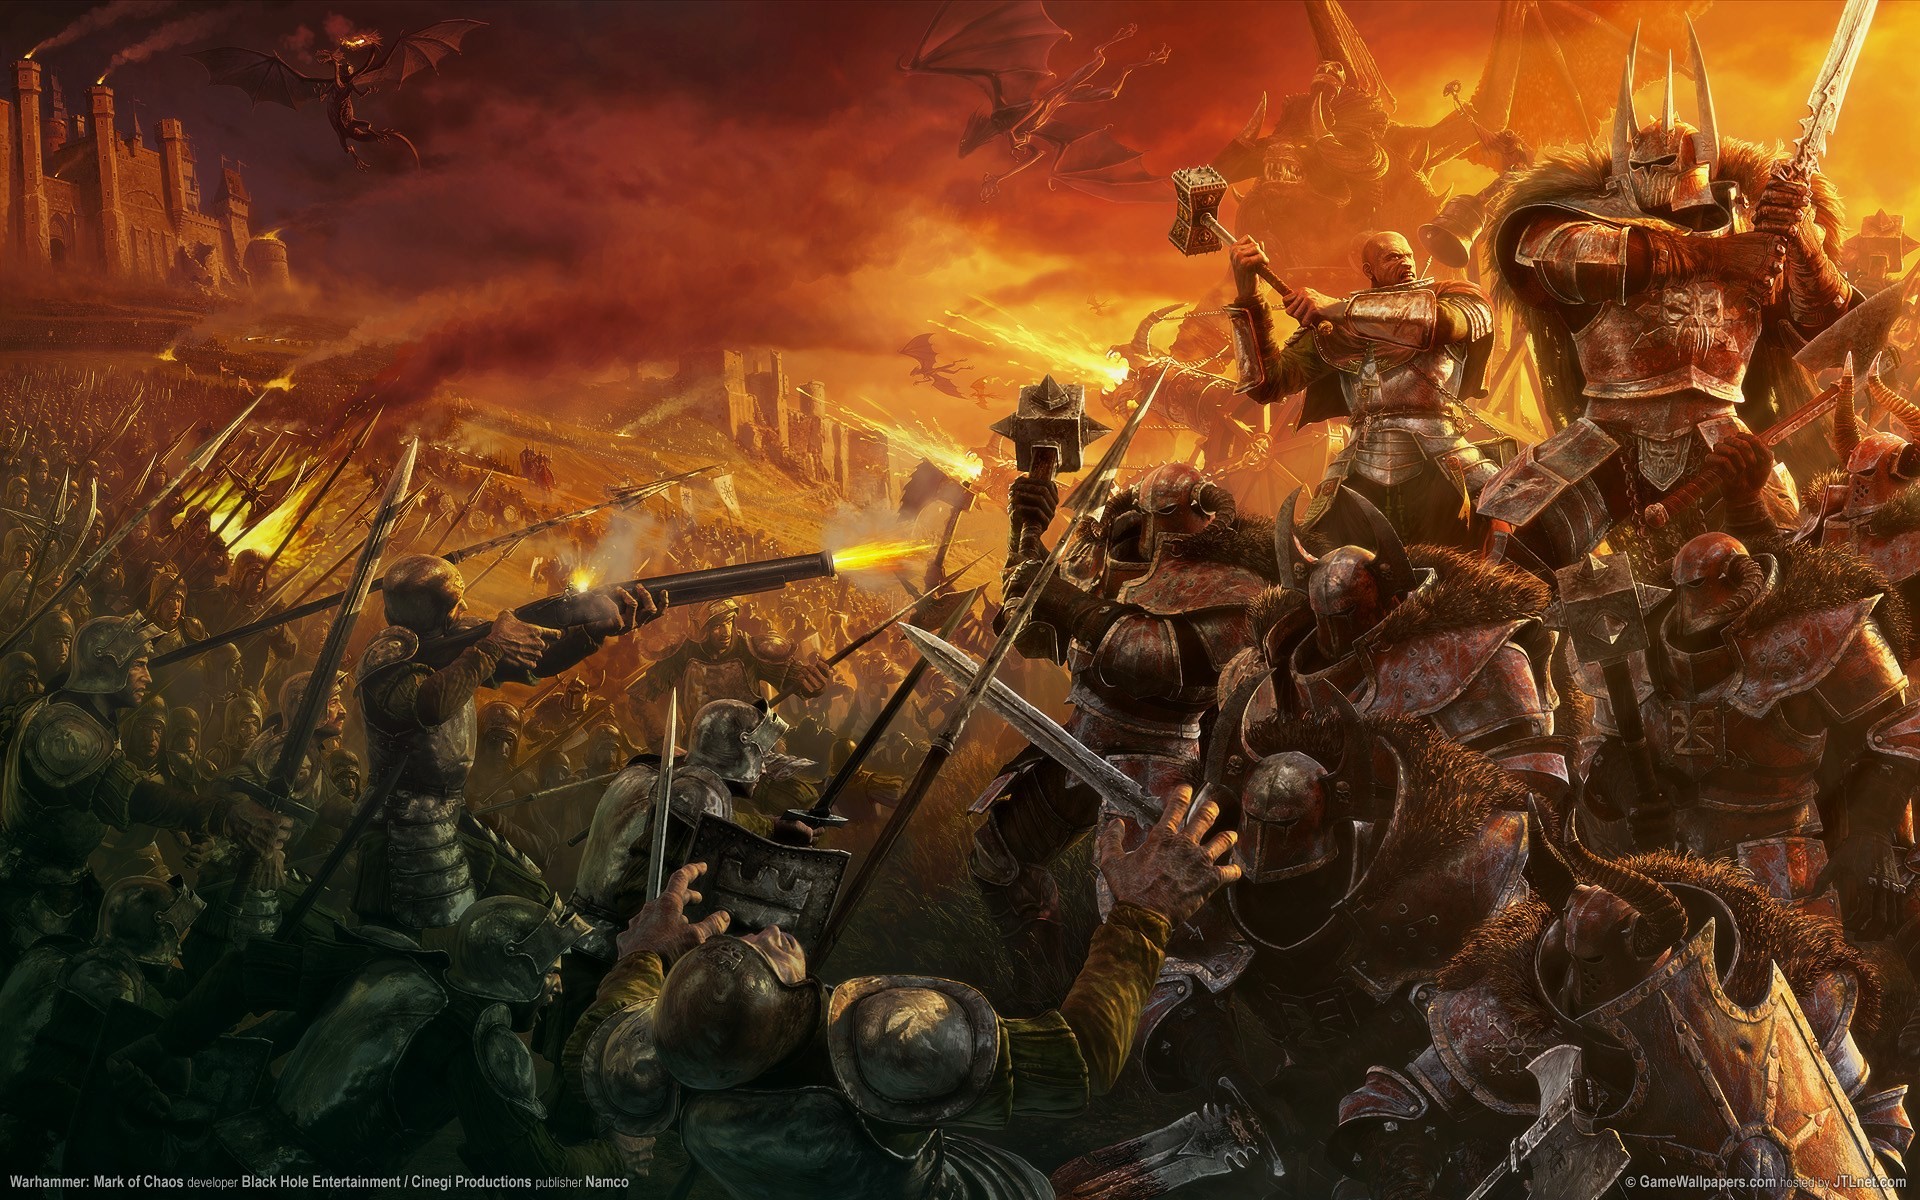 1920x1200 Desktop Backgrounds - warhammer pic by Ainsley Edwards (2017-03-09)